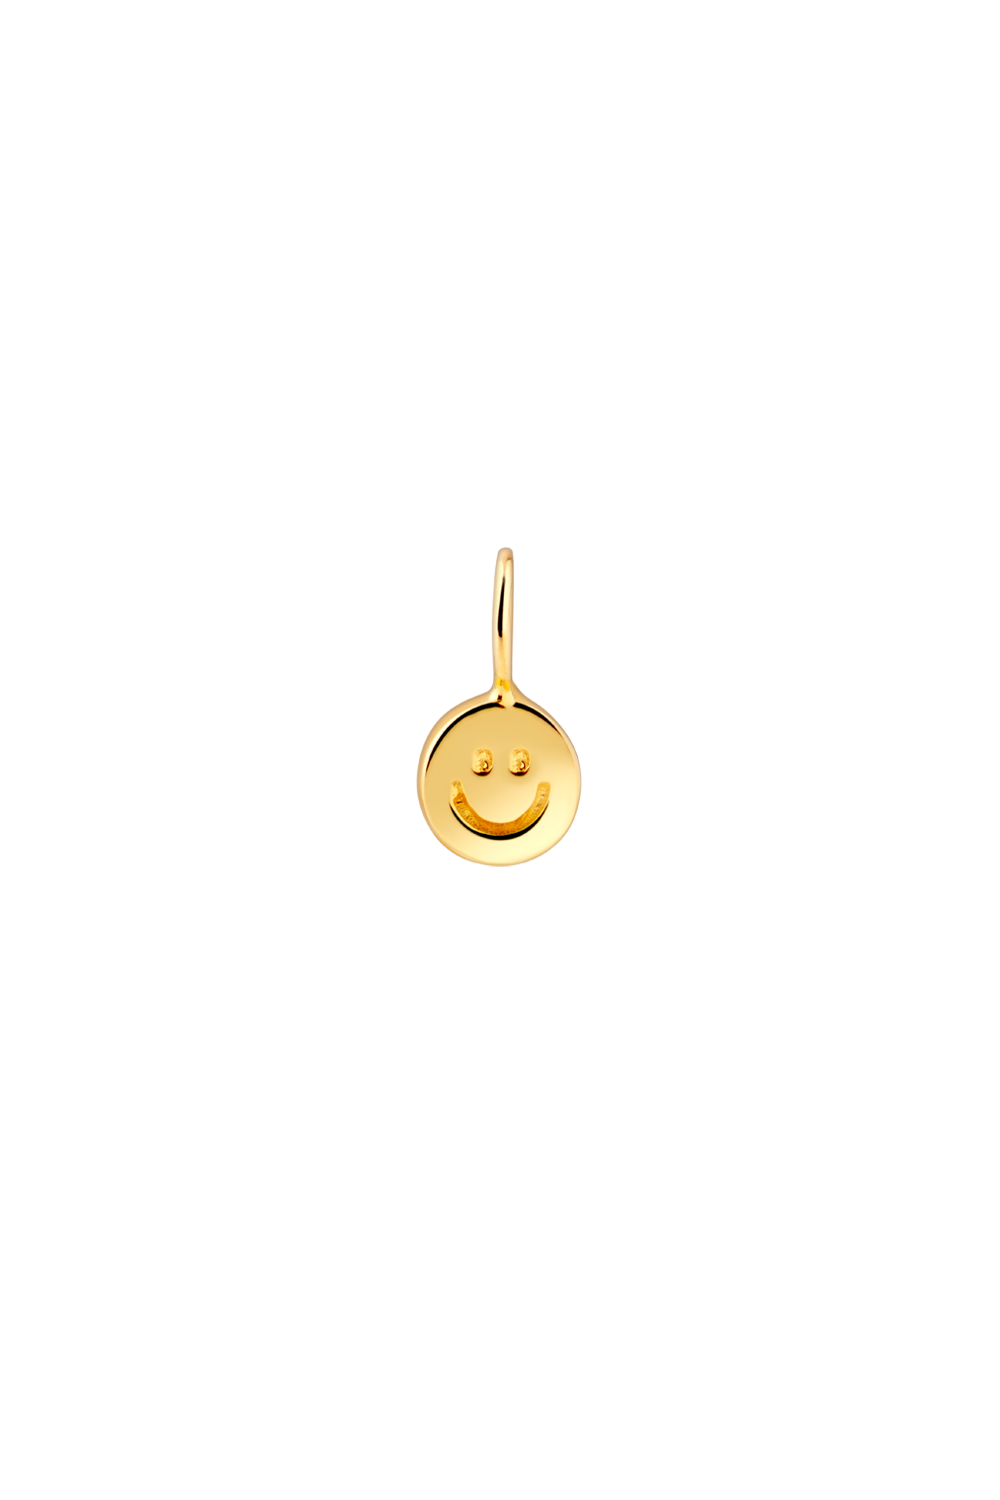 The Fine Gold Smiley Charm Green Peridot